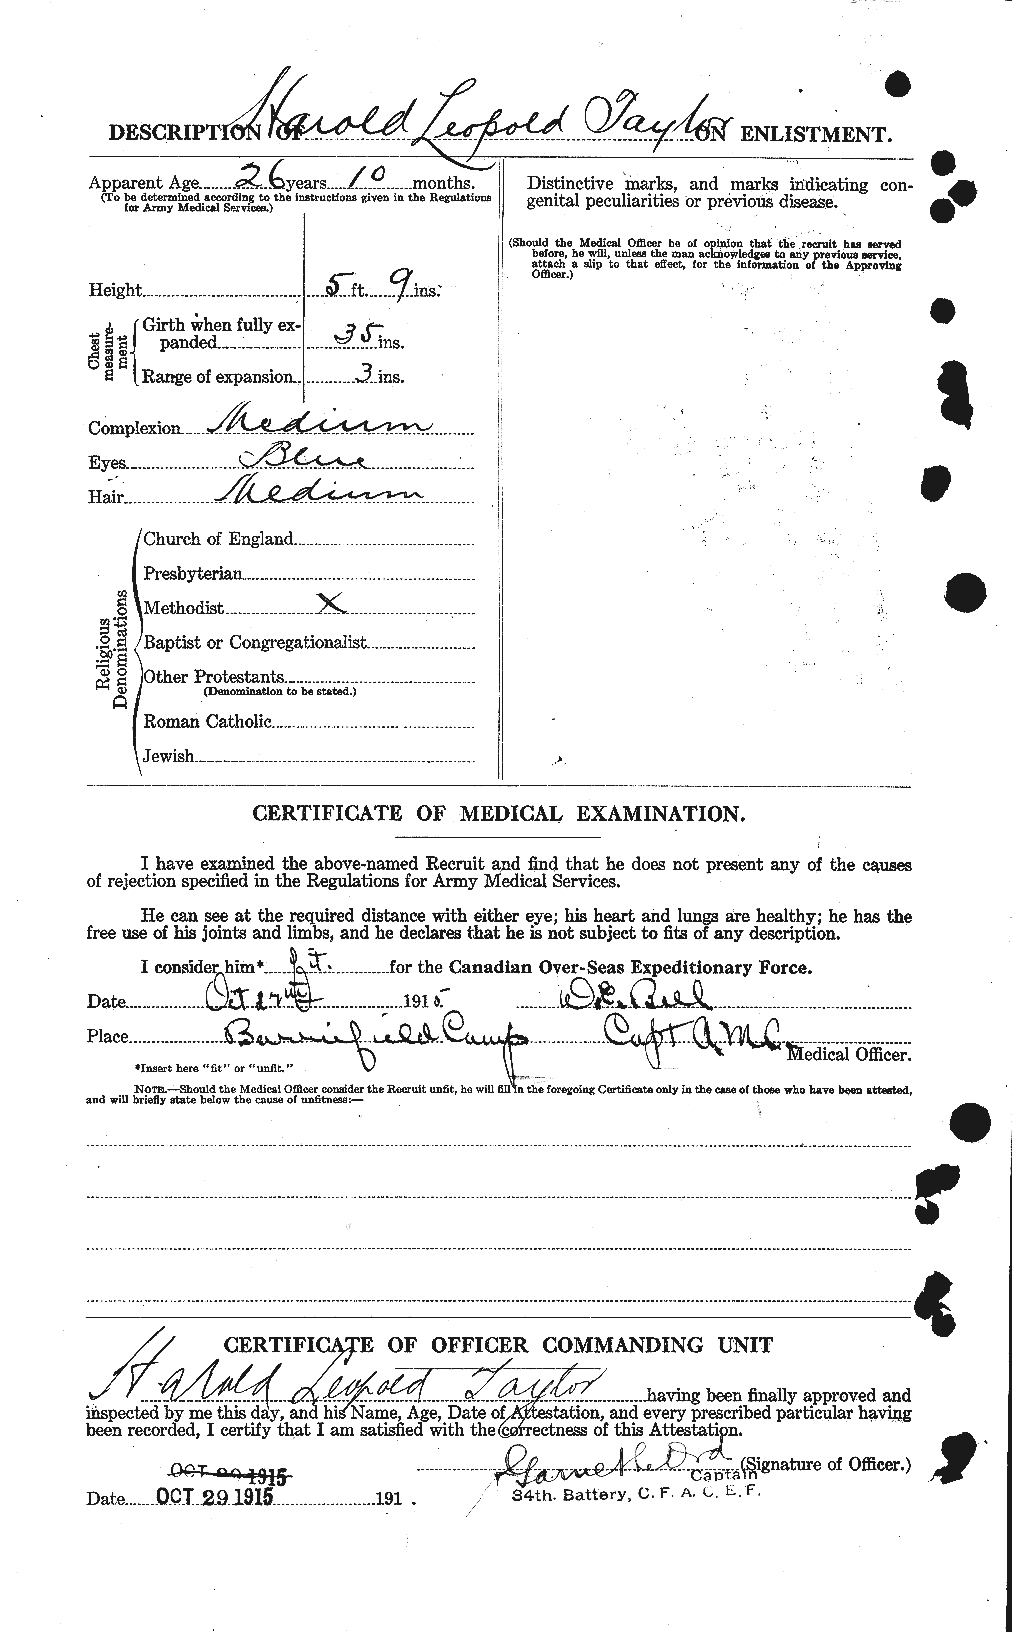 Personnel Records of the First World War - CEF 626427b